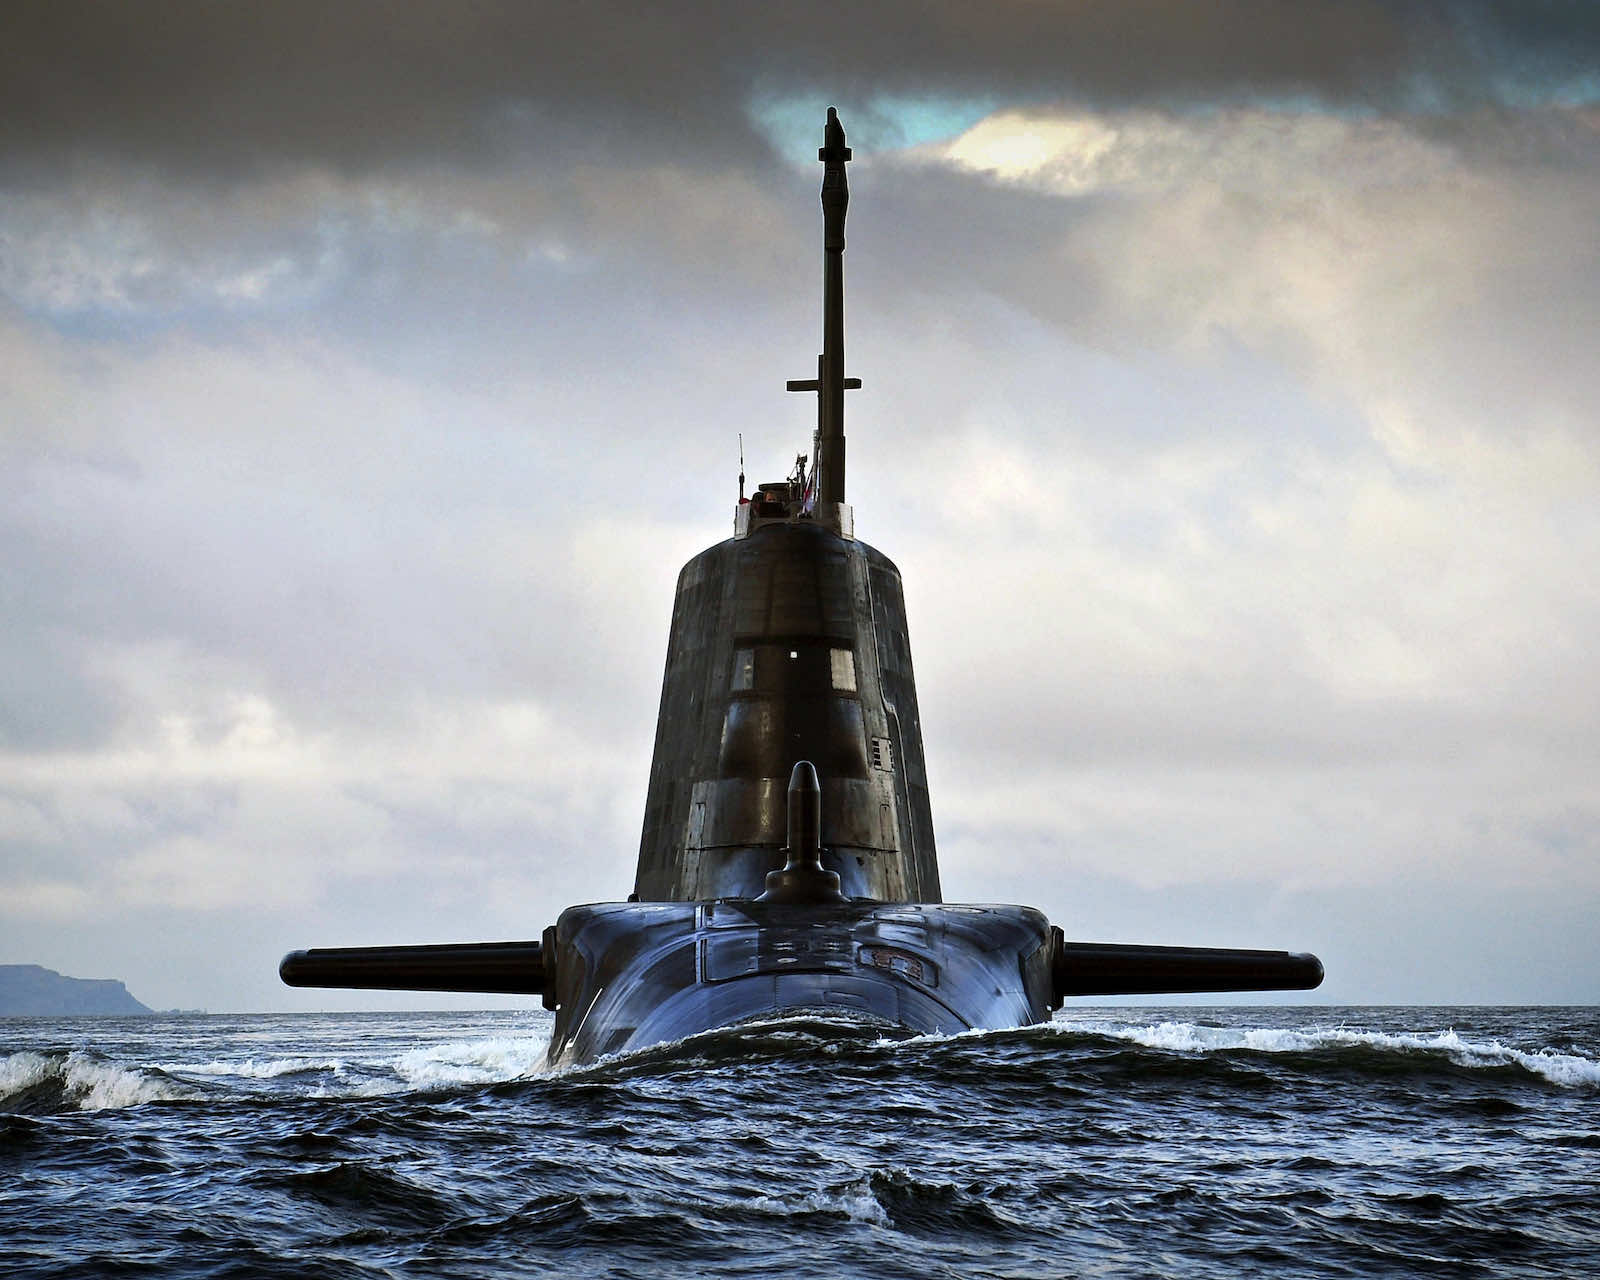 HMS Ambush, one of the Royal Navy’s nuclear submarines (UK Ministry of Defence)